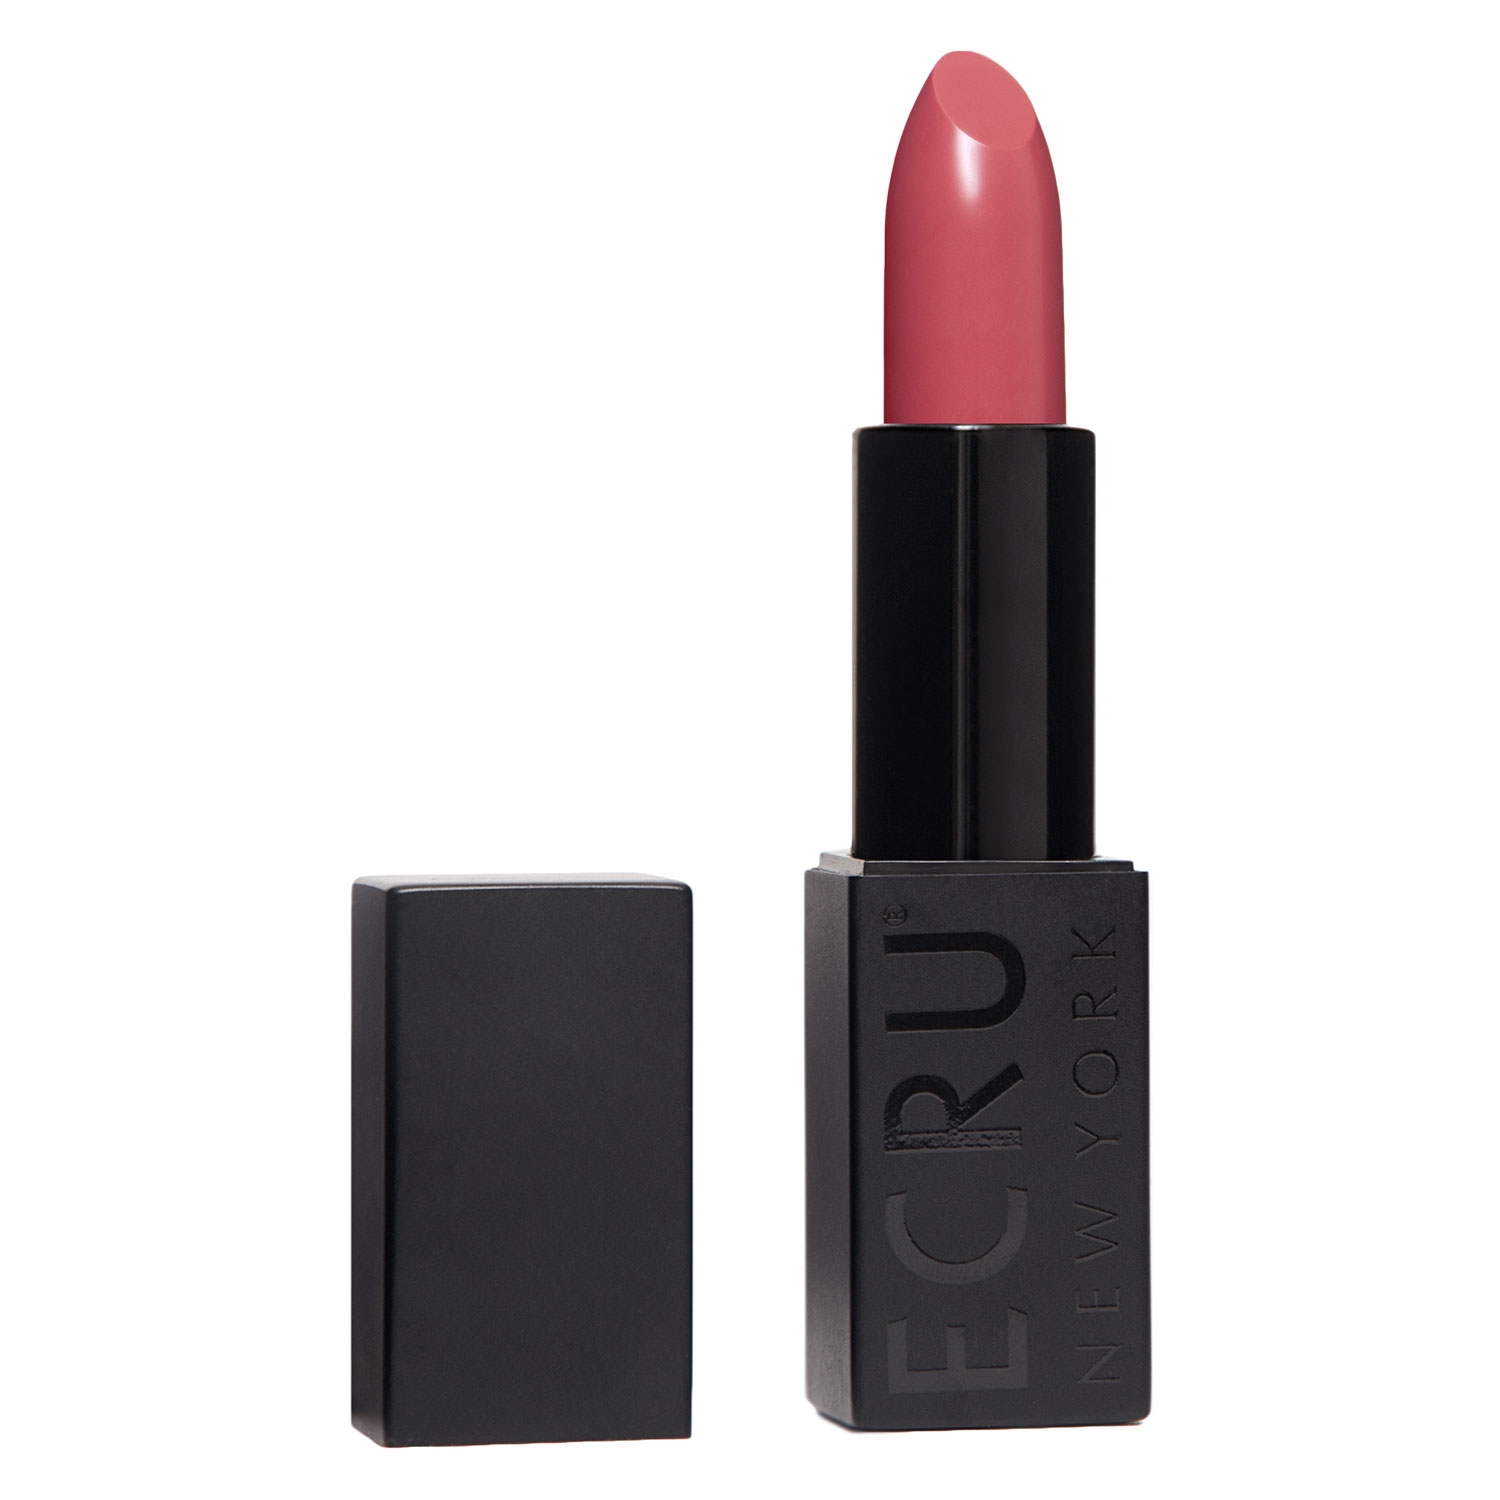 Product image from Ecru Beauty - VelvetAir Lipstick Dusty Rose